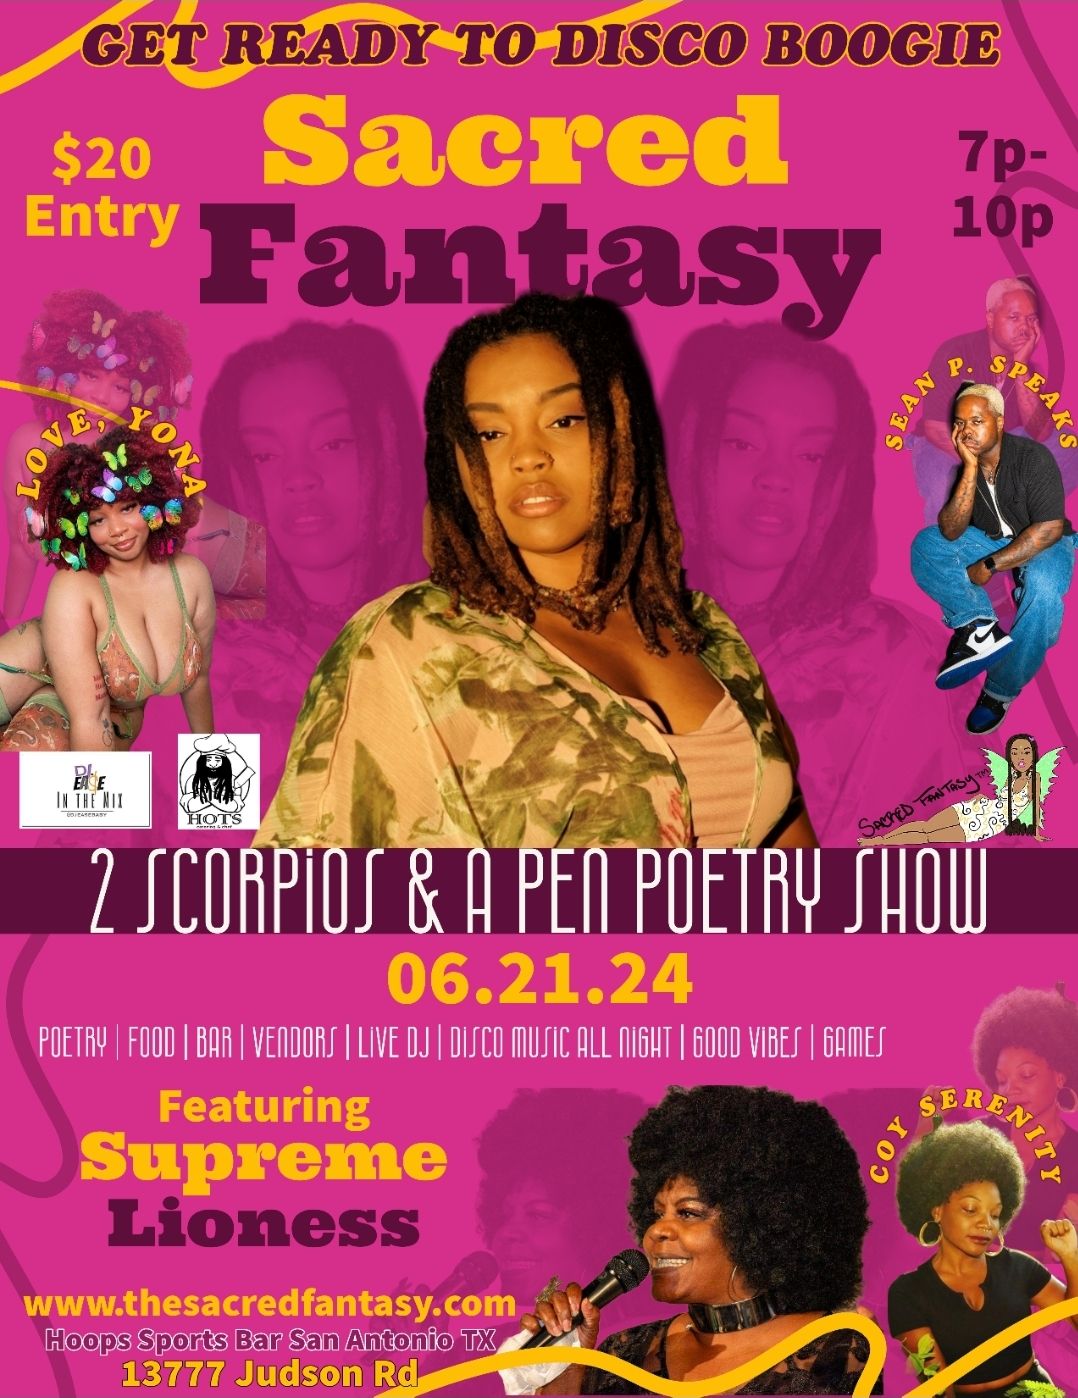 2 Scorpios & A Pen Poetry Show at Hoops Sports Bar (Disco Boogie)